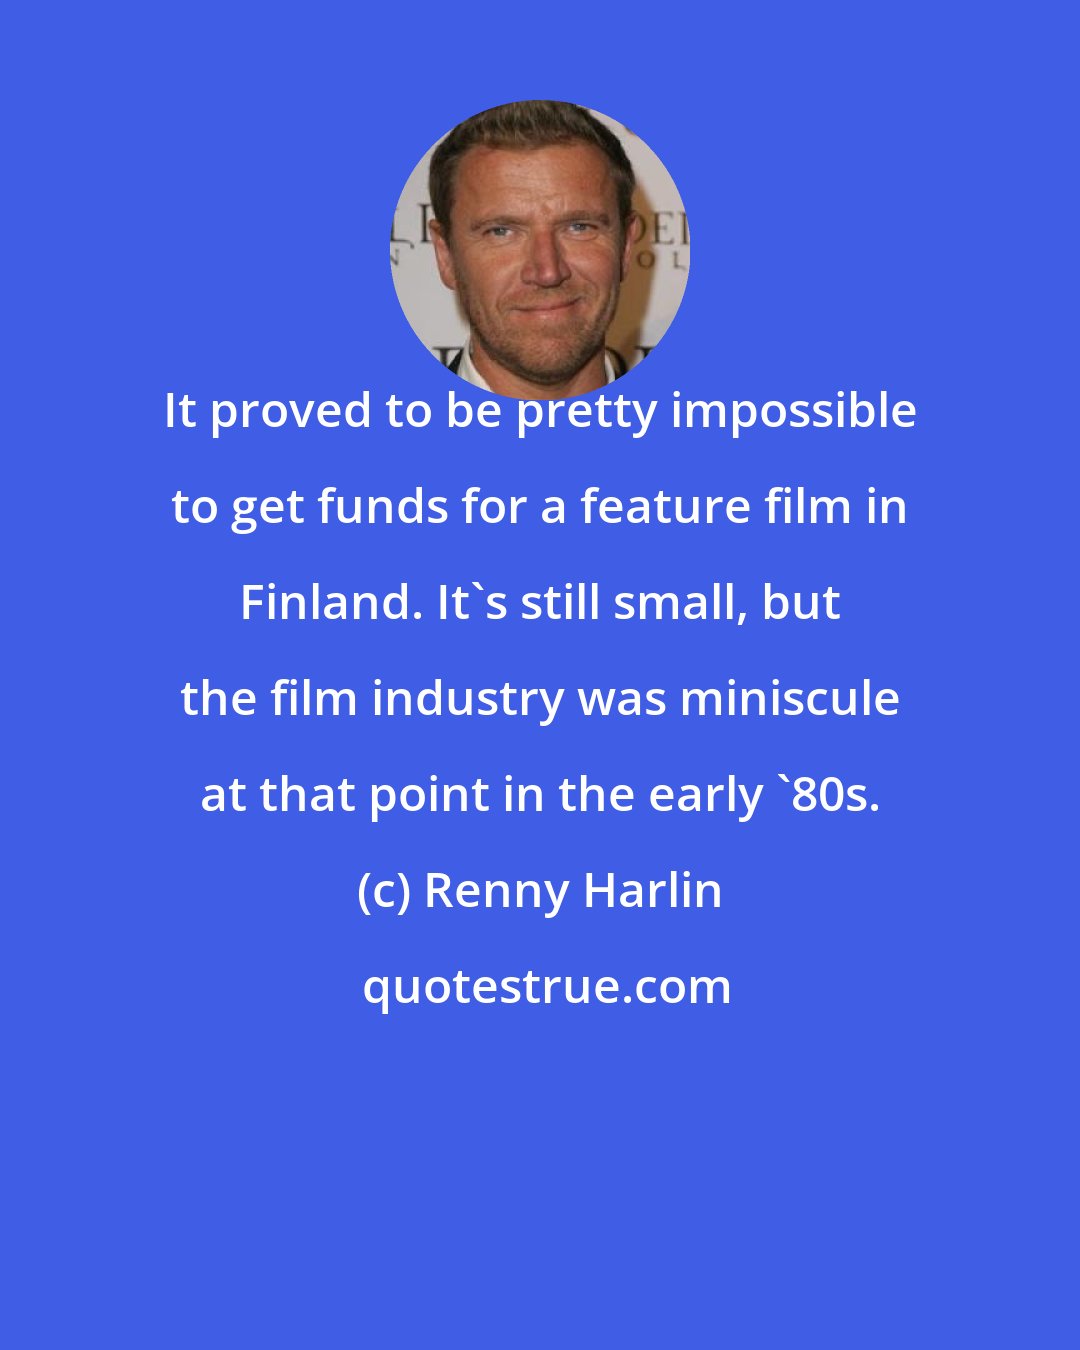 Renny Harlin: It proved to be pretty impossible to get funds for a feature film in Finland. It's still small, but the film industry was miniscule at that point in the early '80s.